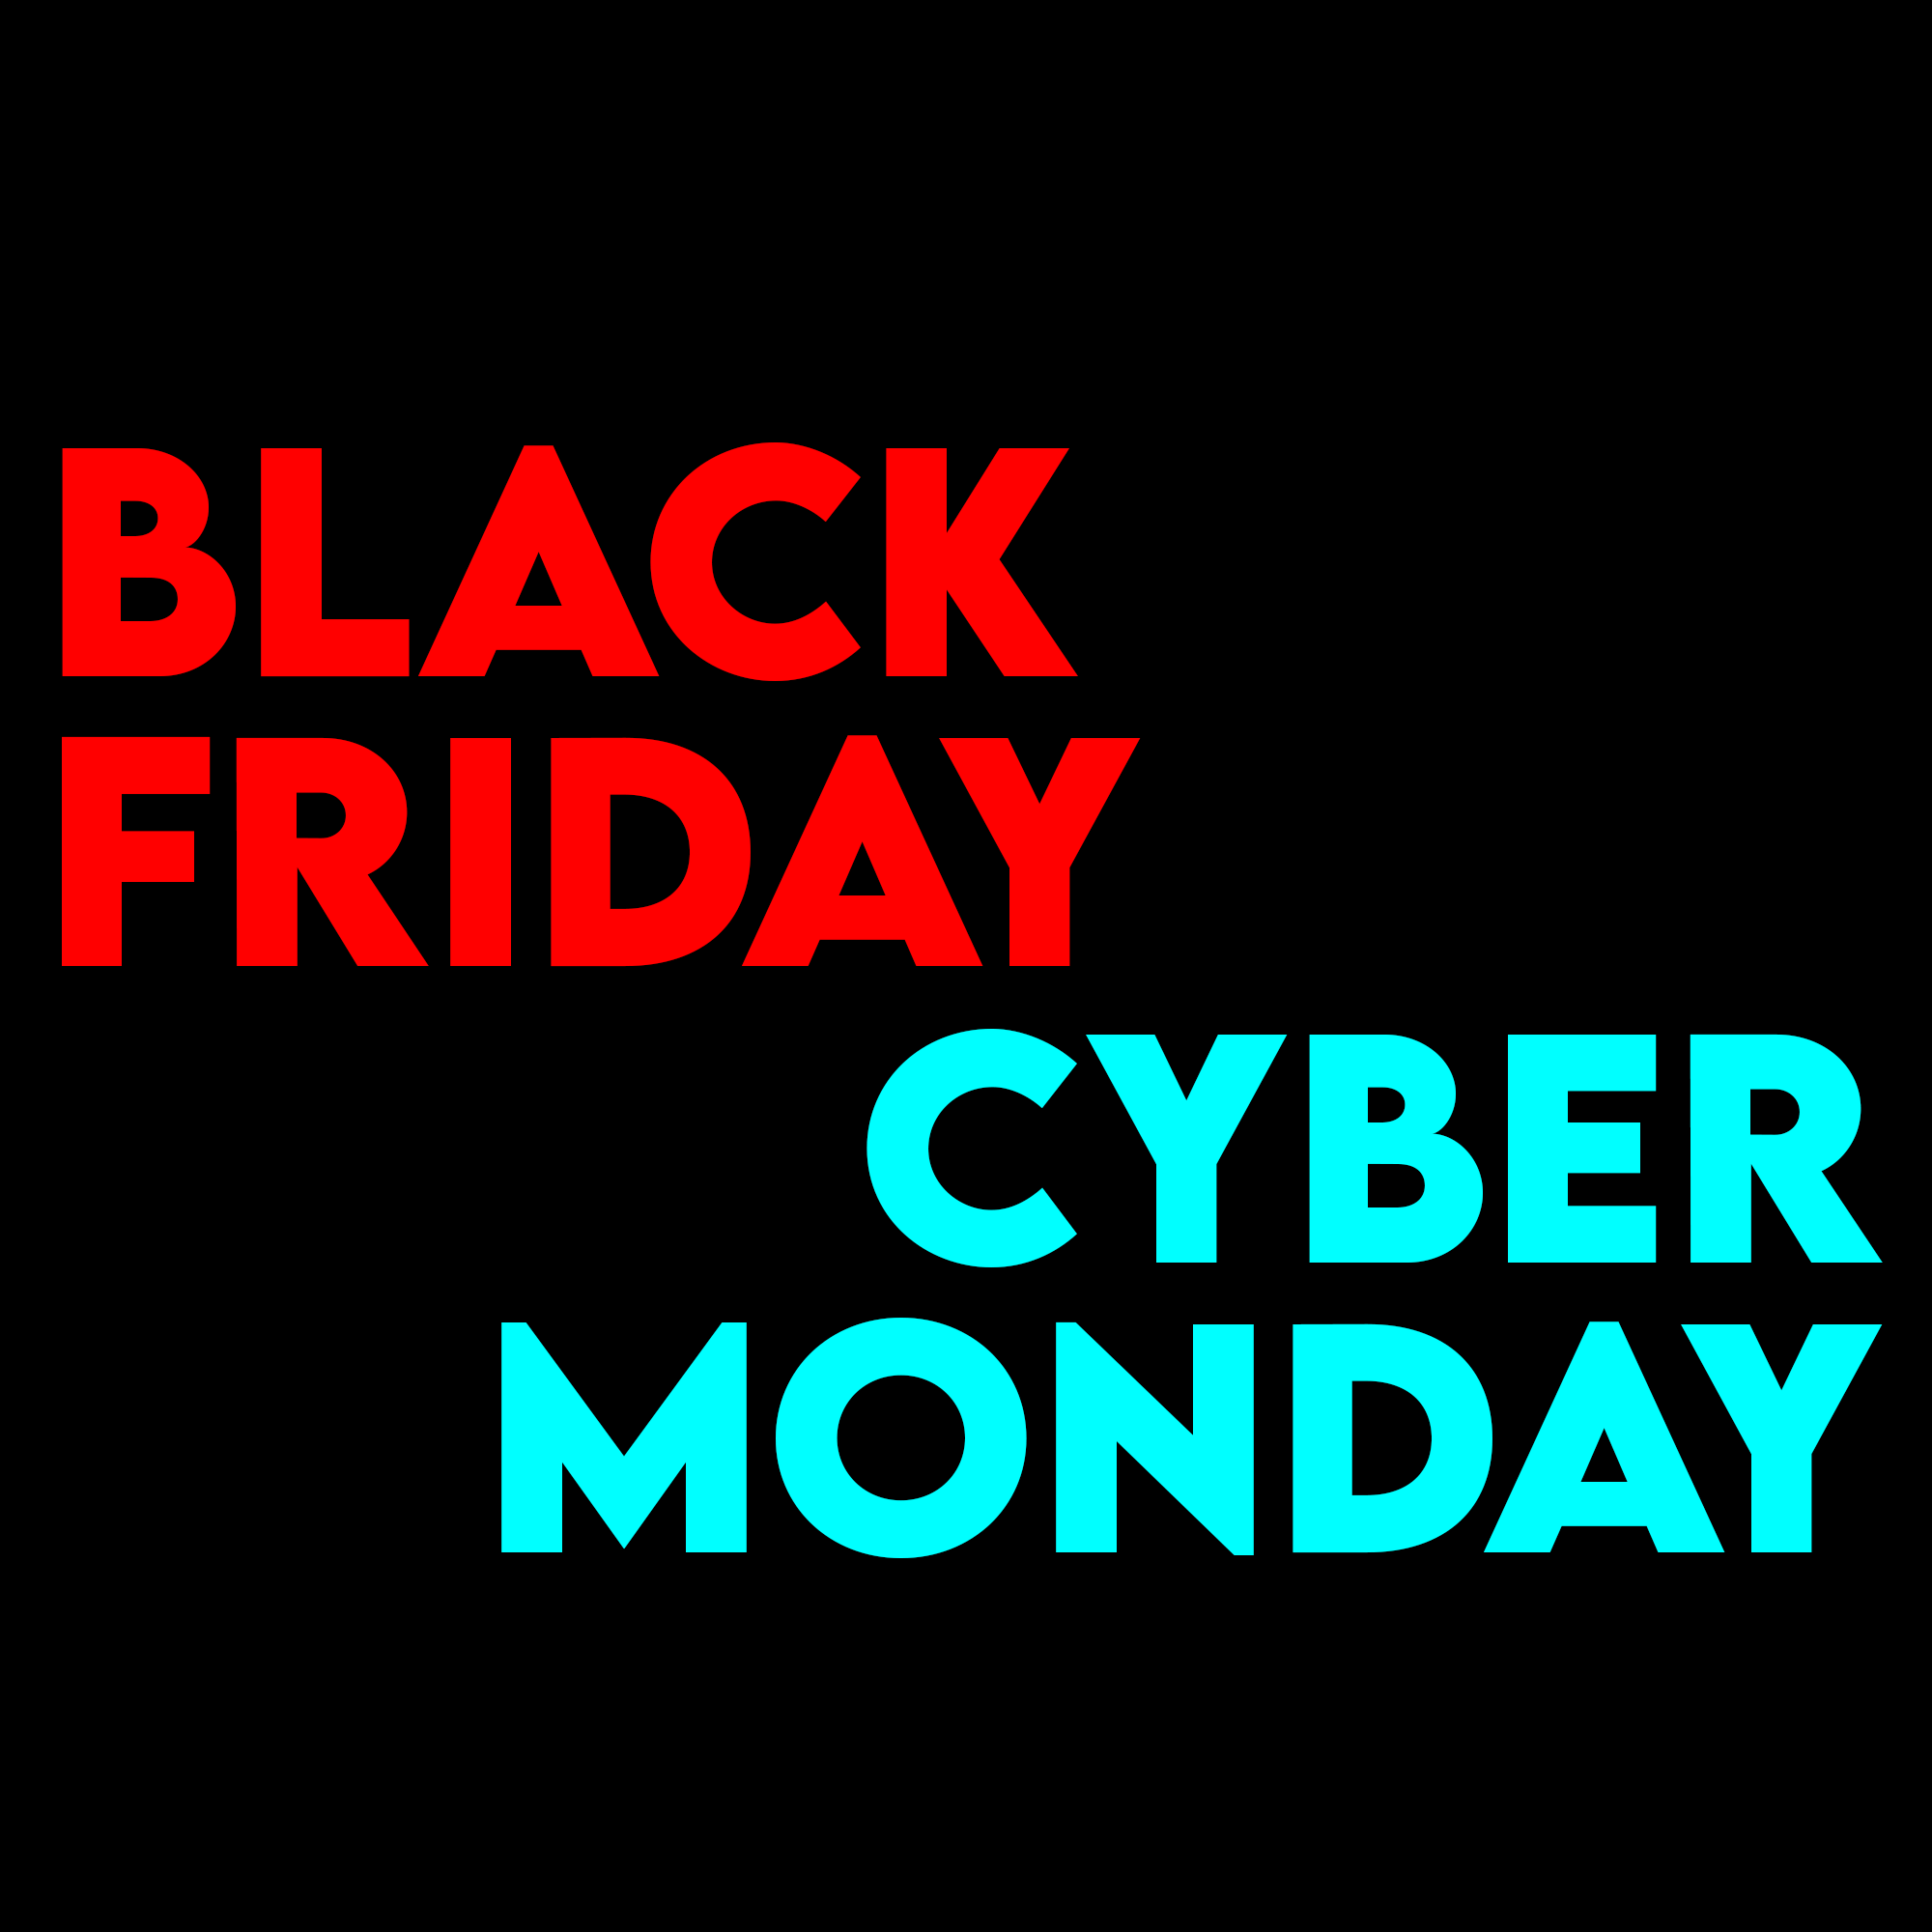 Get excited! Black Friday & Cyber Monday Deals are HERE! Ending on